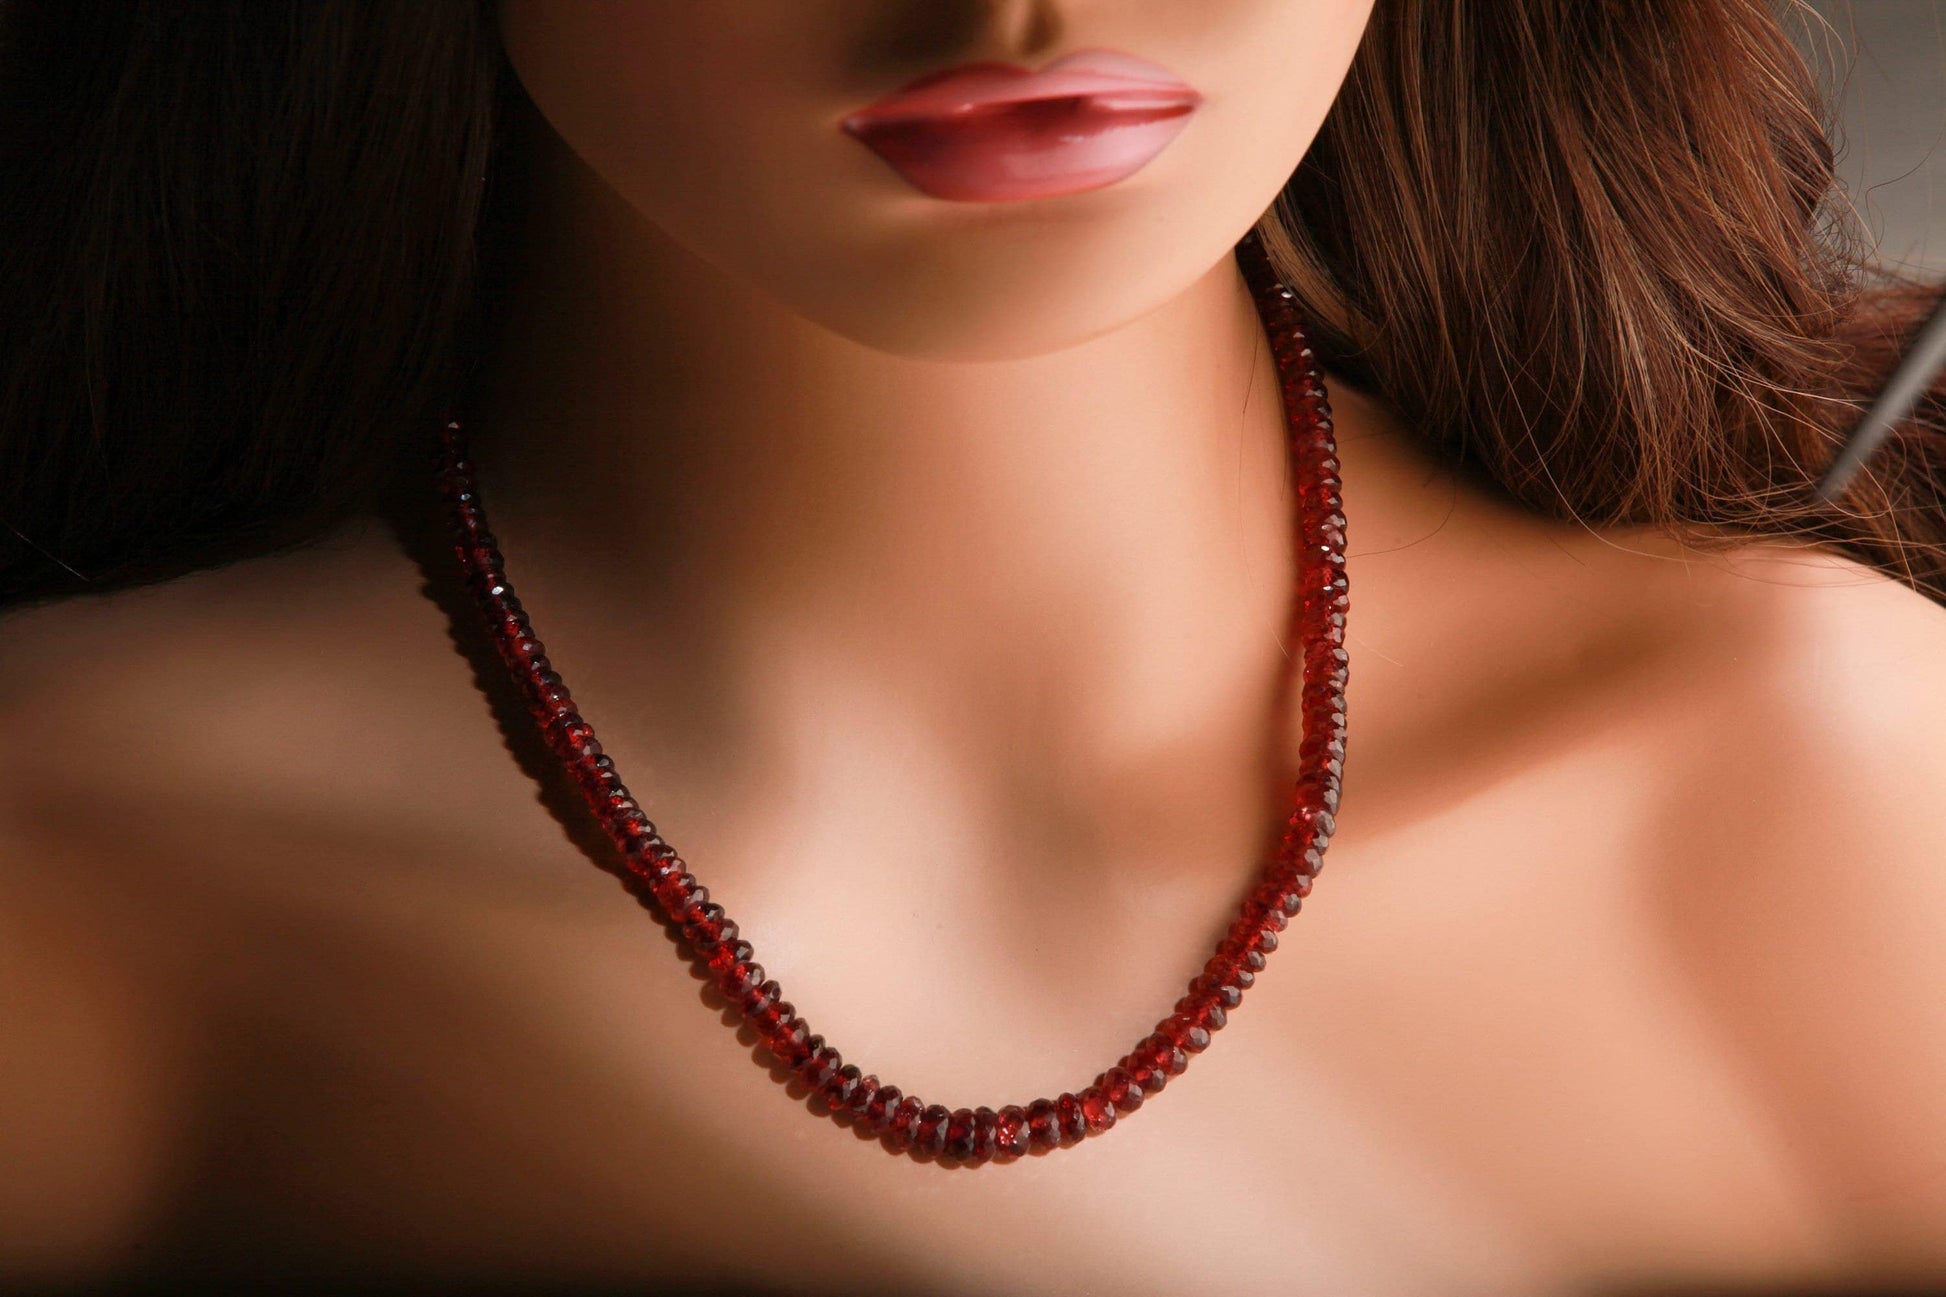 Genuine Garnet large AAA Faceted Rondelle Graduated 5-7mm 16&quot; Necklace with 3&quot; Rhodium Extension Chain, January Birthstone, precious gift .